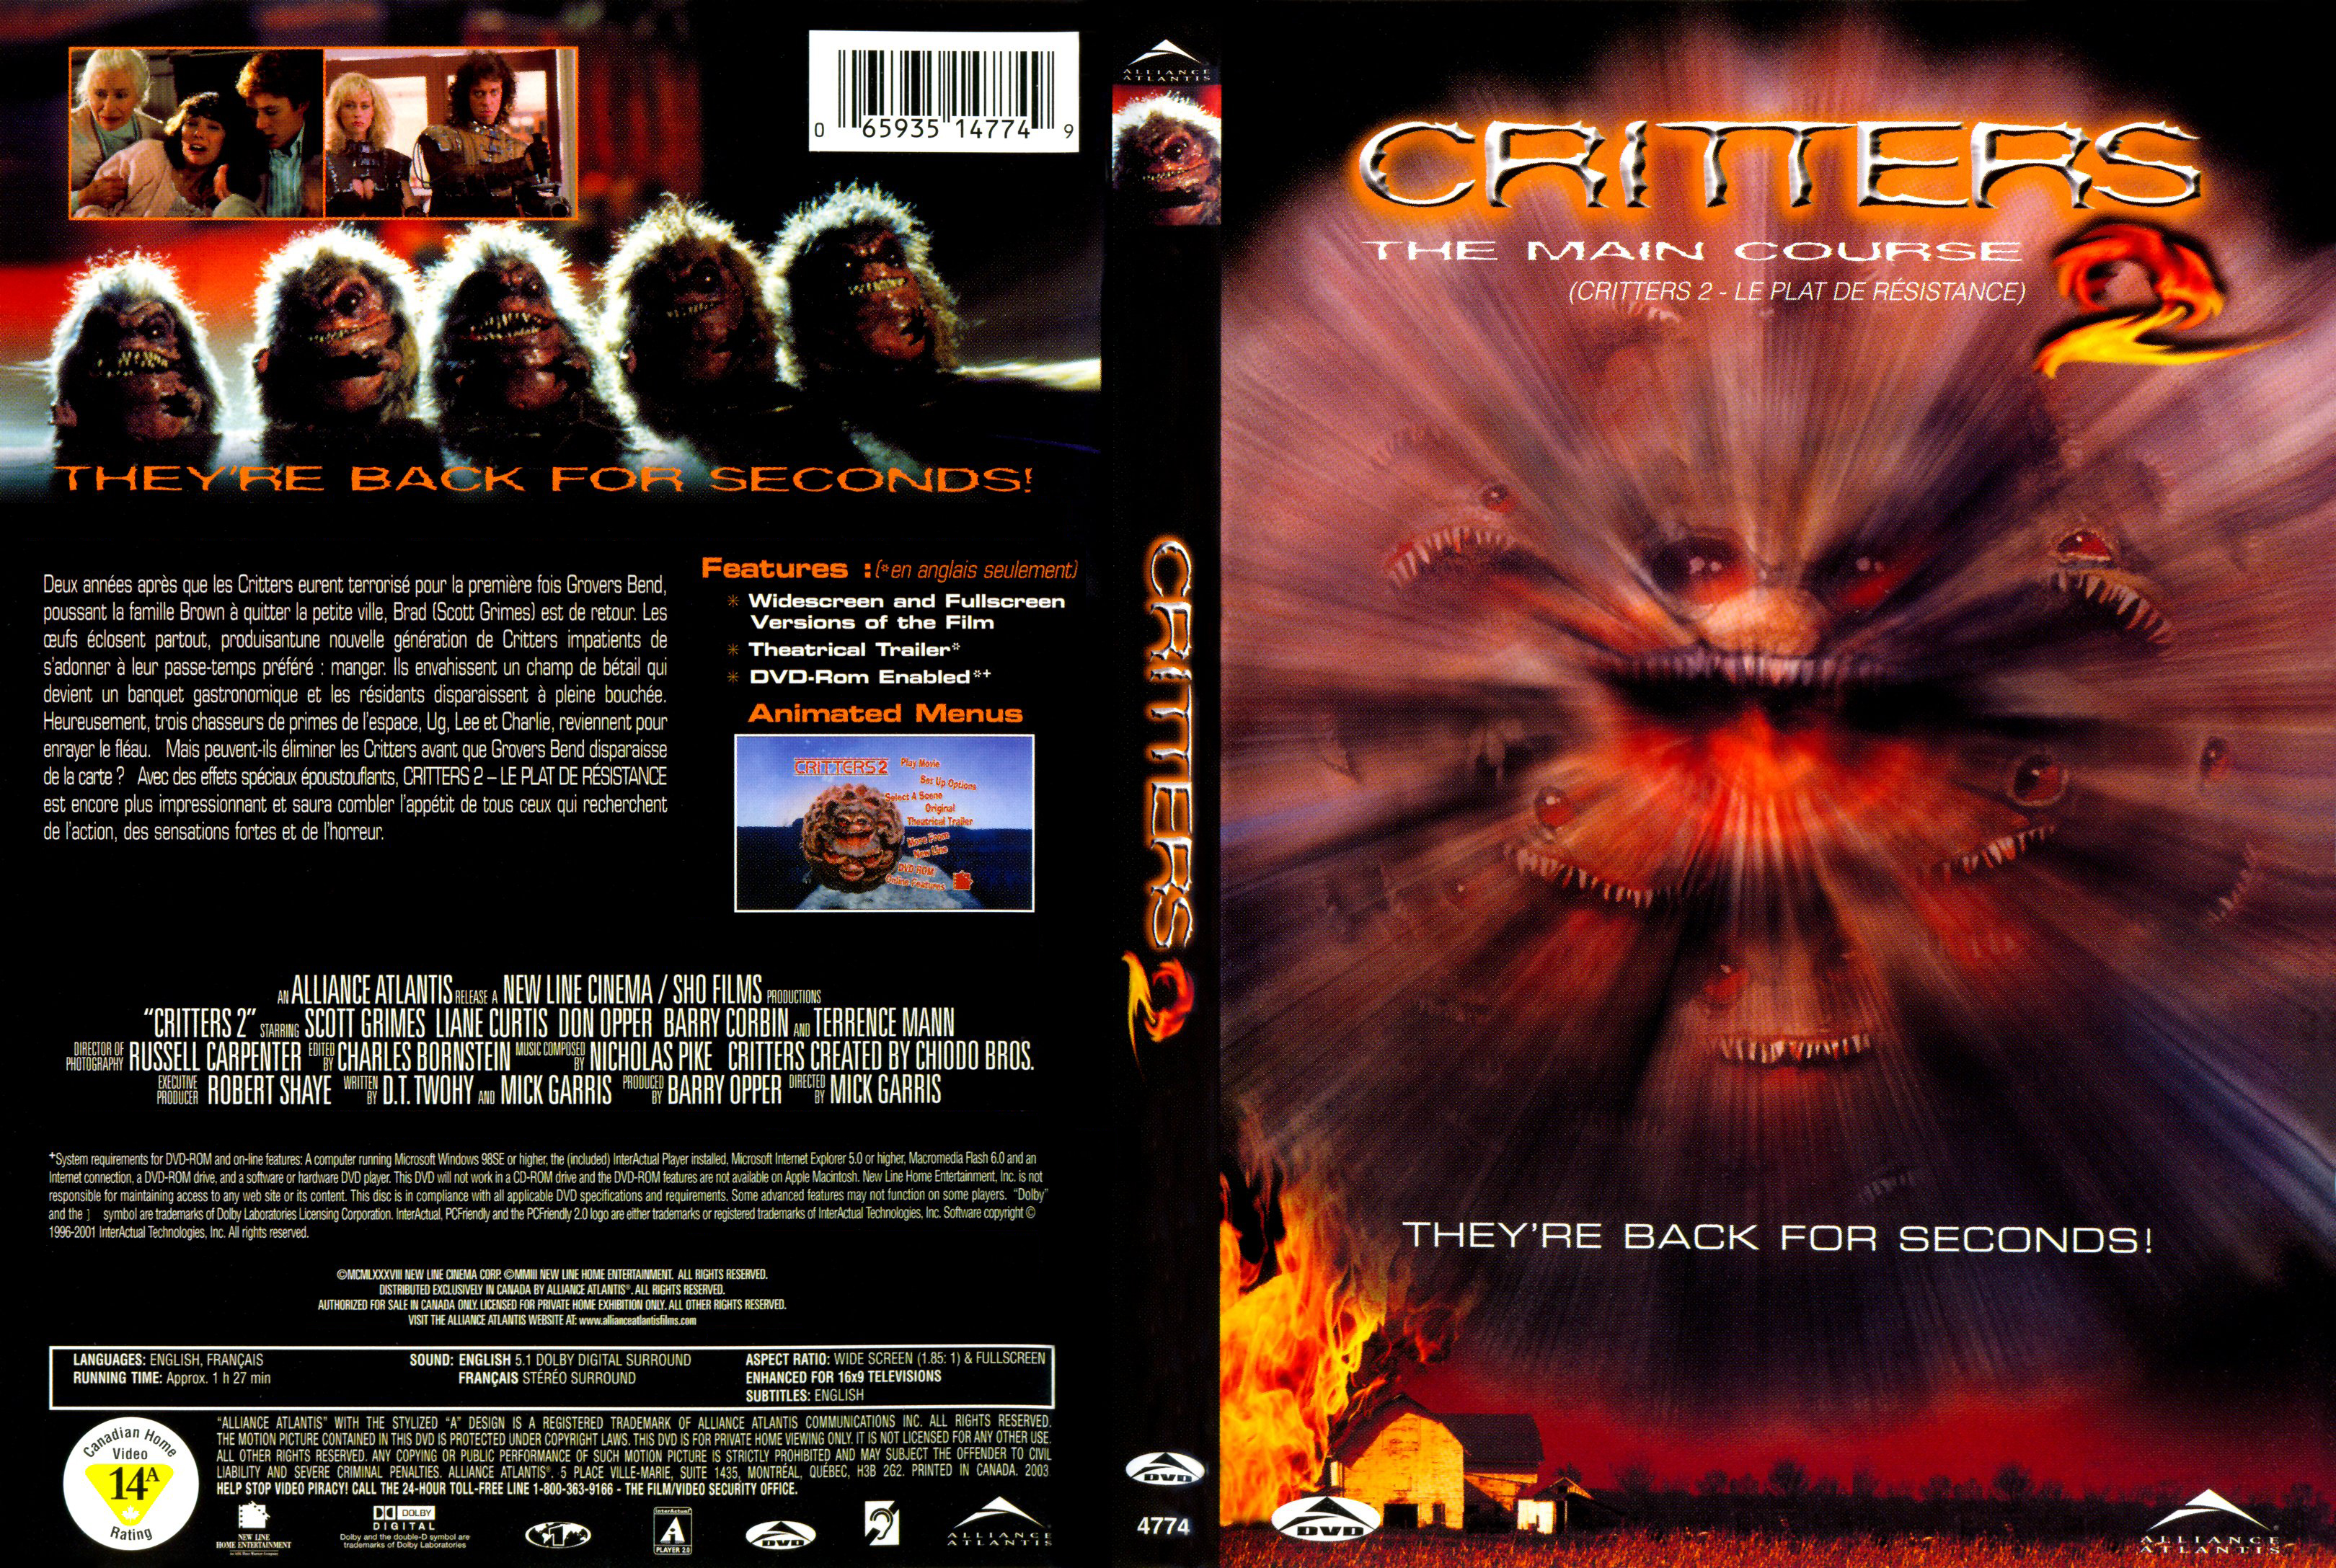 Jaquette DVD Critters 2 - The Main Course (Canadienne)